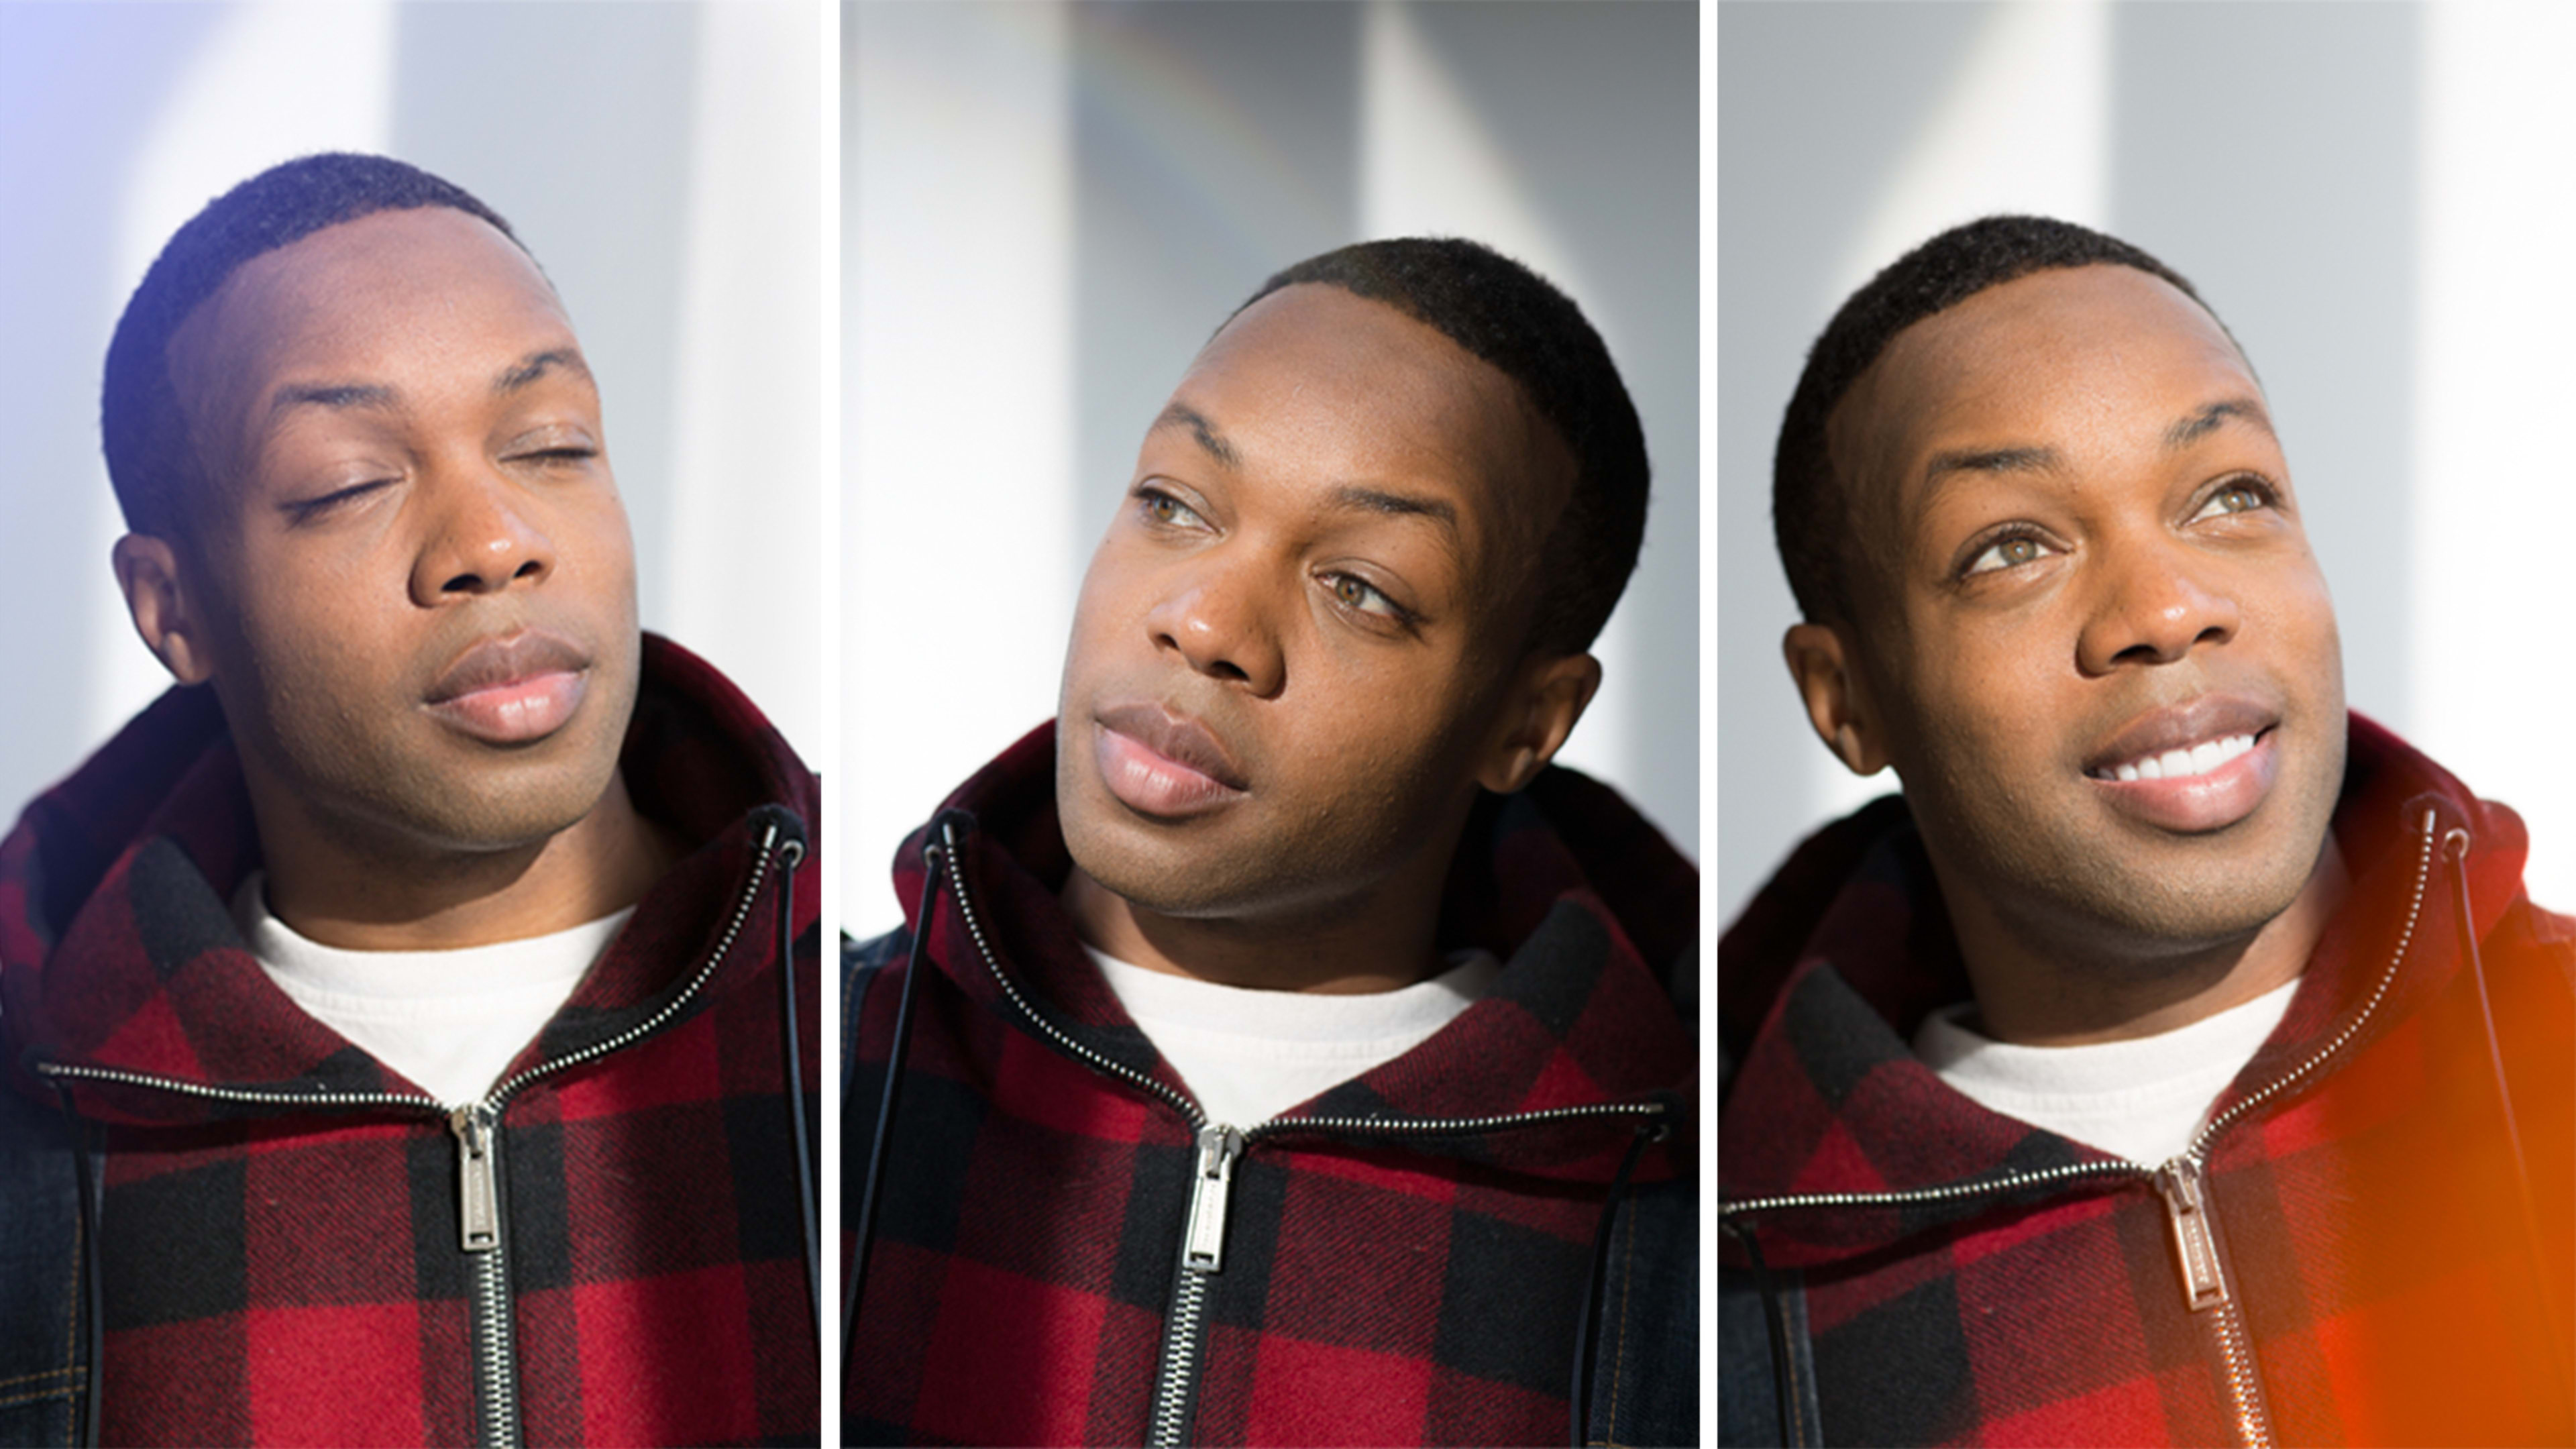 Todrick Hall Invites You “Behind The Curtain” Of His Dizzying Hustle